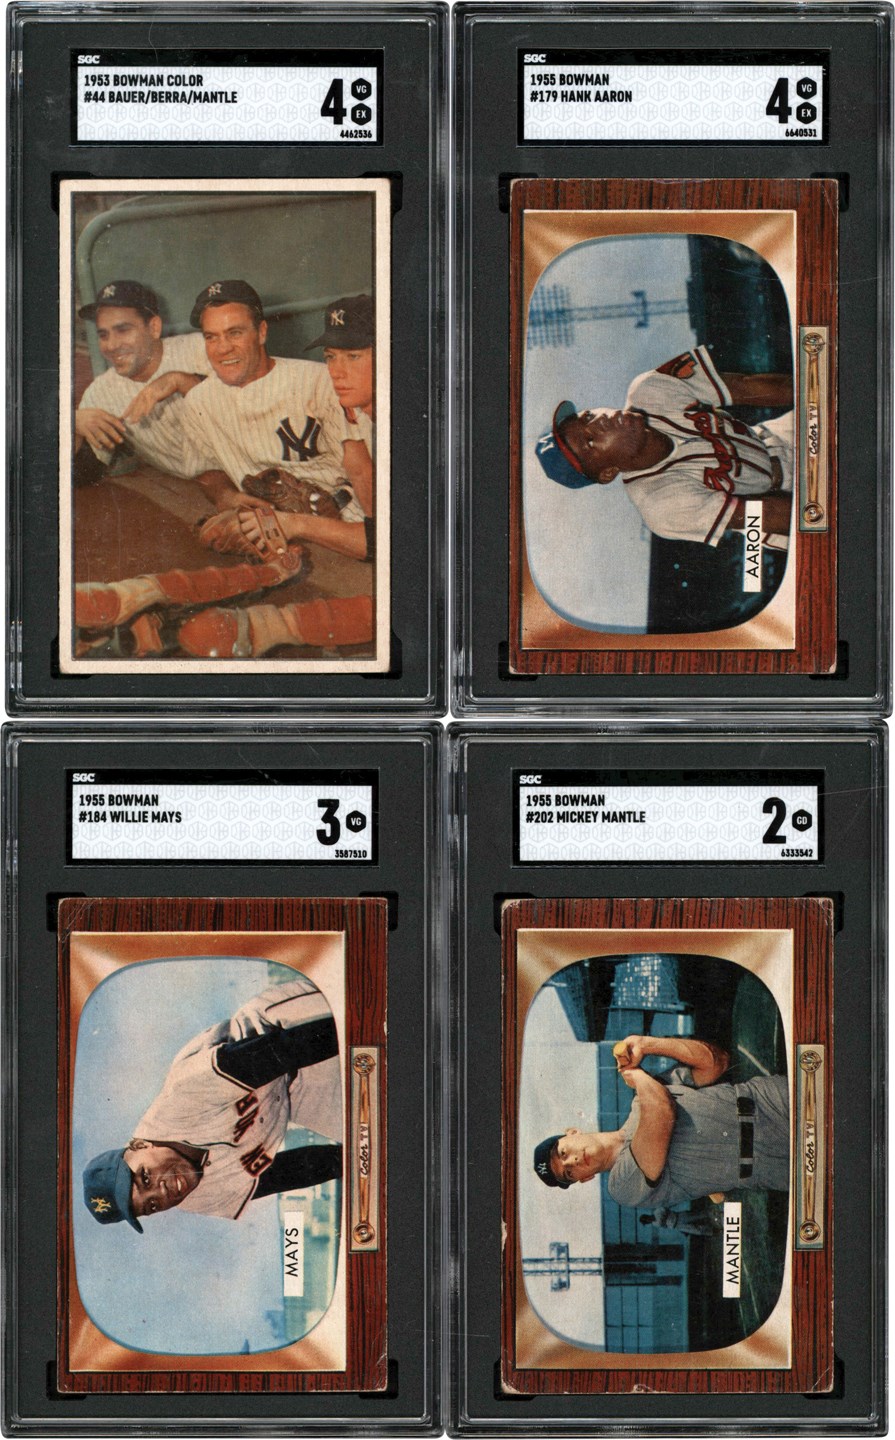 - 1950-1955 Bowman Collection (44) w/Mantle, Mays, Aaron and Many Other Hall of Famers